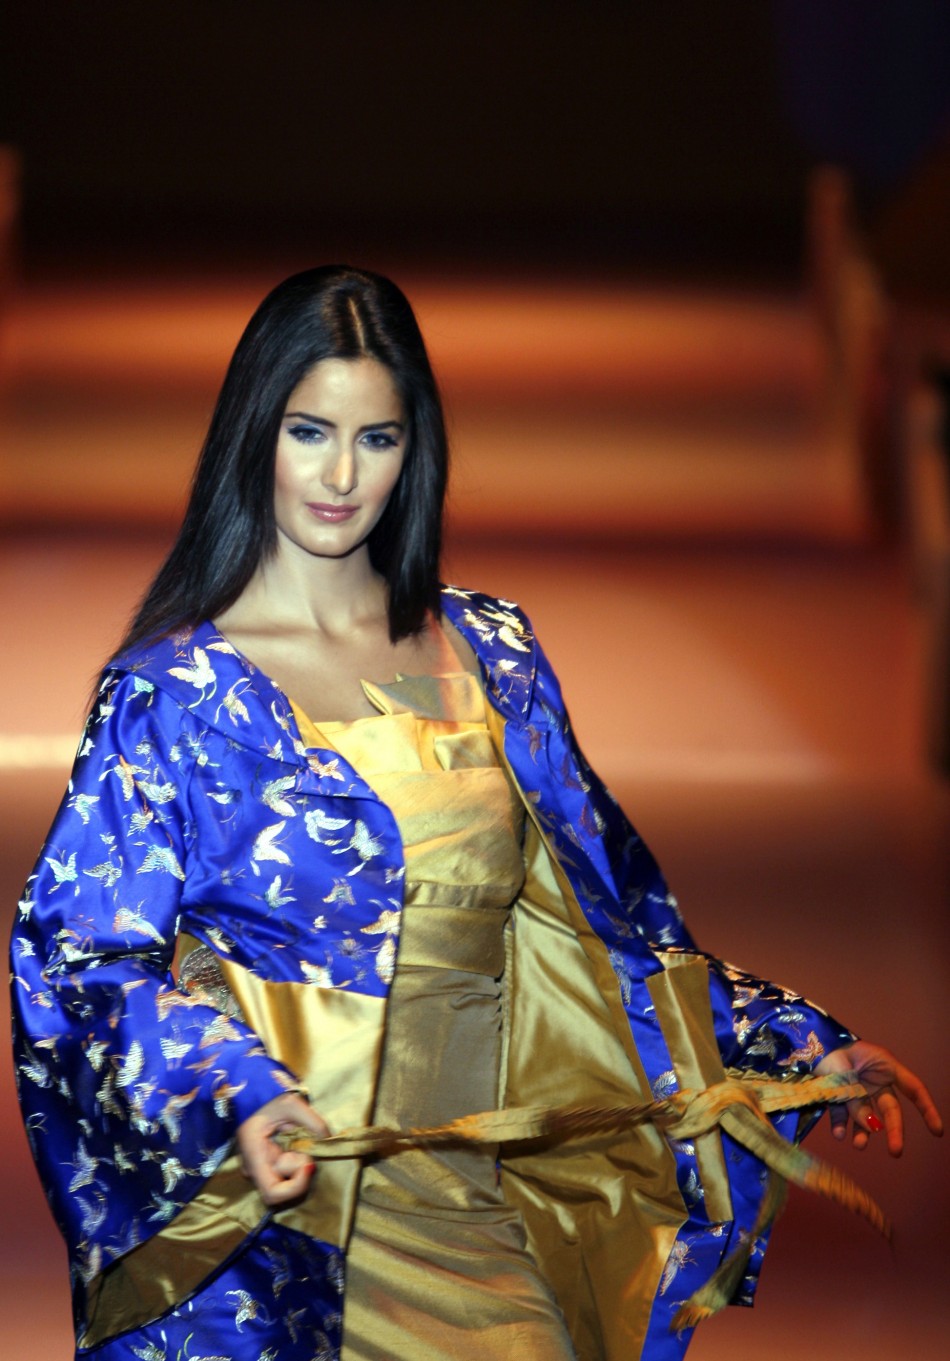 Kaif displays an outfit by Indian designer Narendra Kumar during the grand finale of India fashion week in Mumbai March 31, 2007.